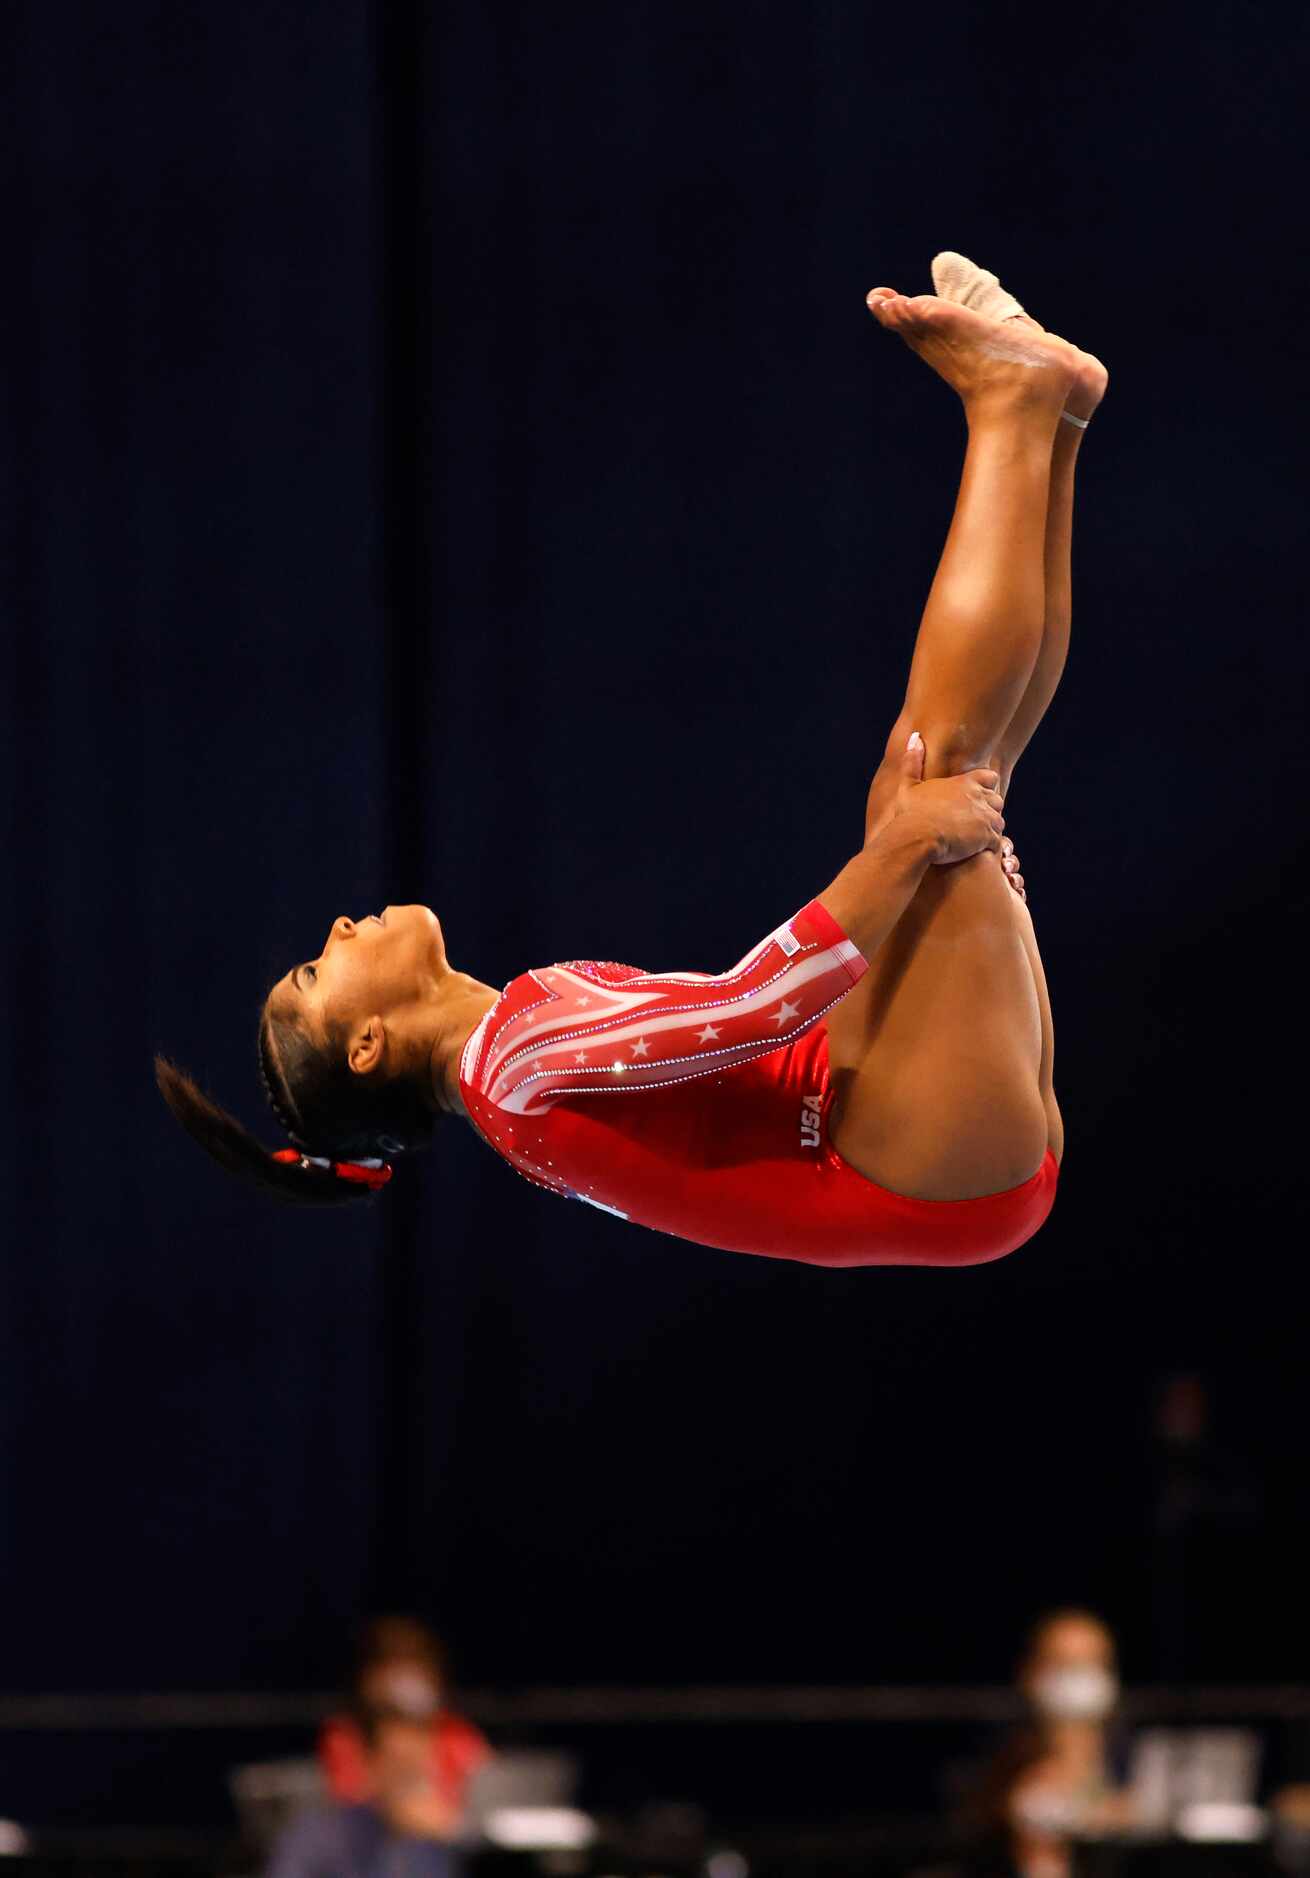 Jordan Chiles during her floor routine during day 2 of the women's 2021 U.S. Olympic Trials...